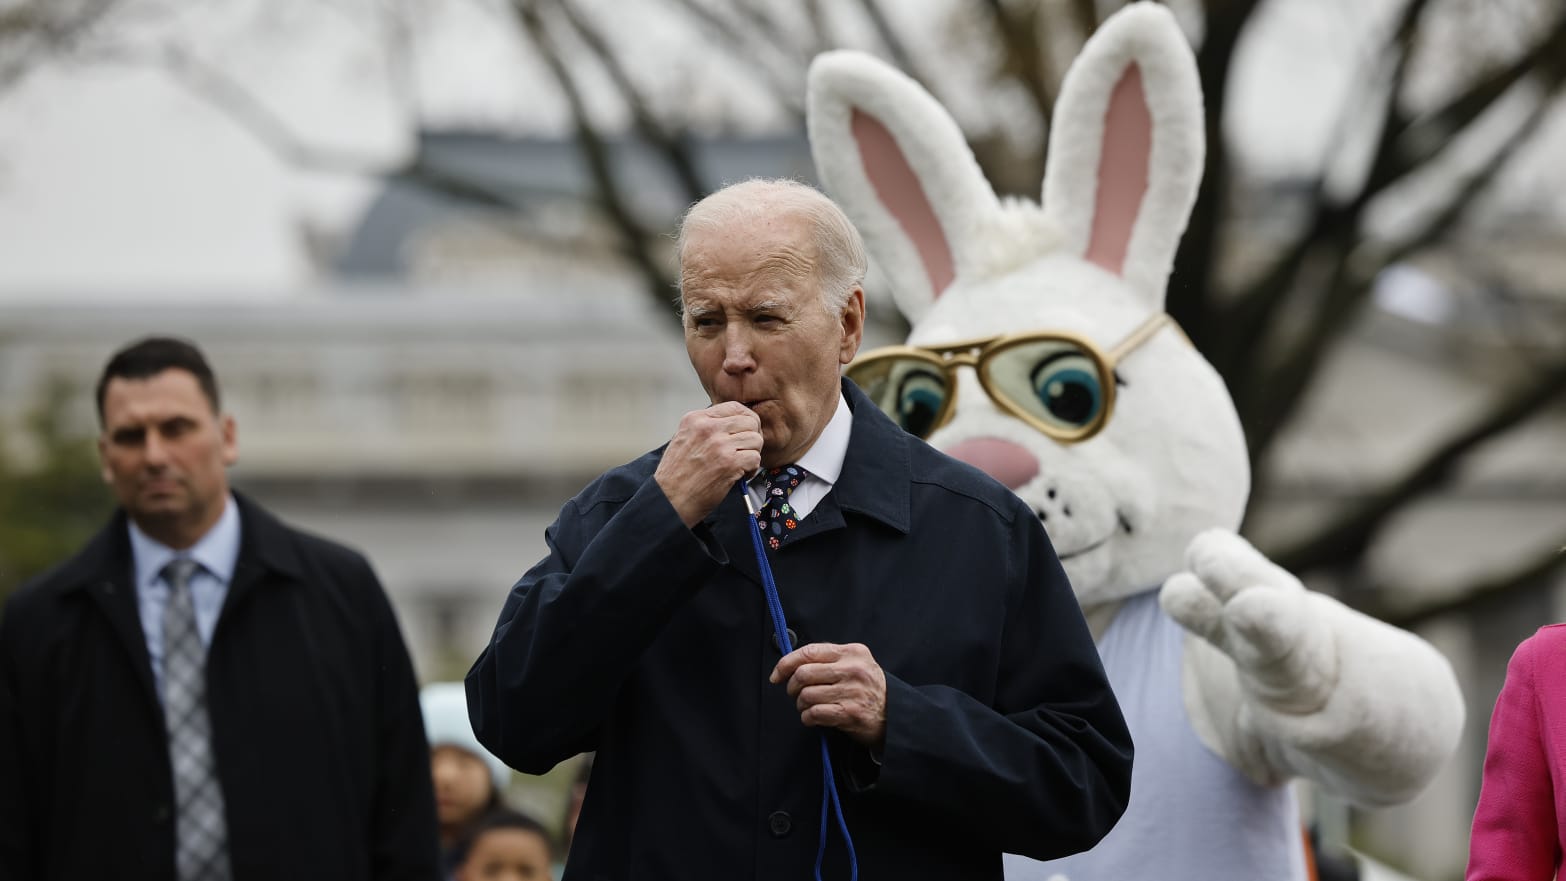 Joe Biden blows a whistle to kick off the White House Easter Egg Roll 